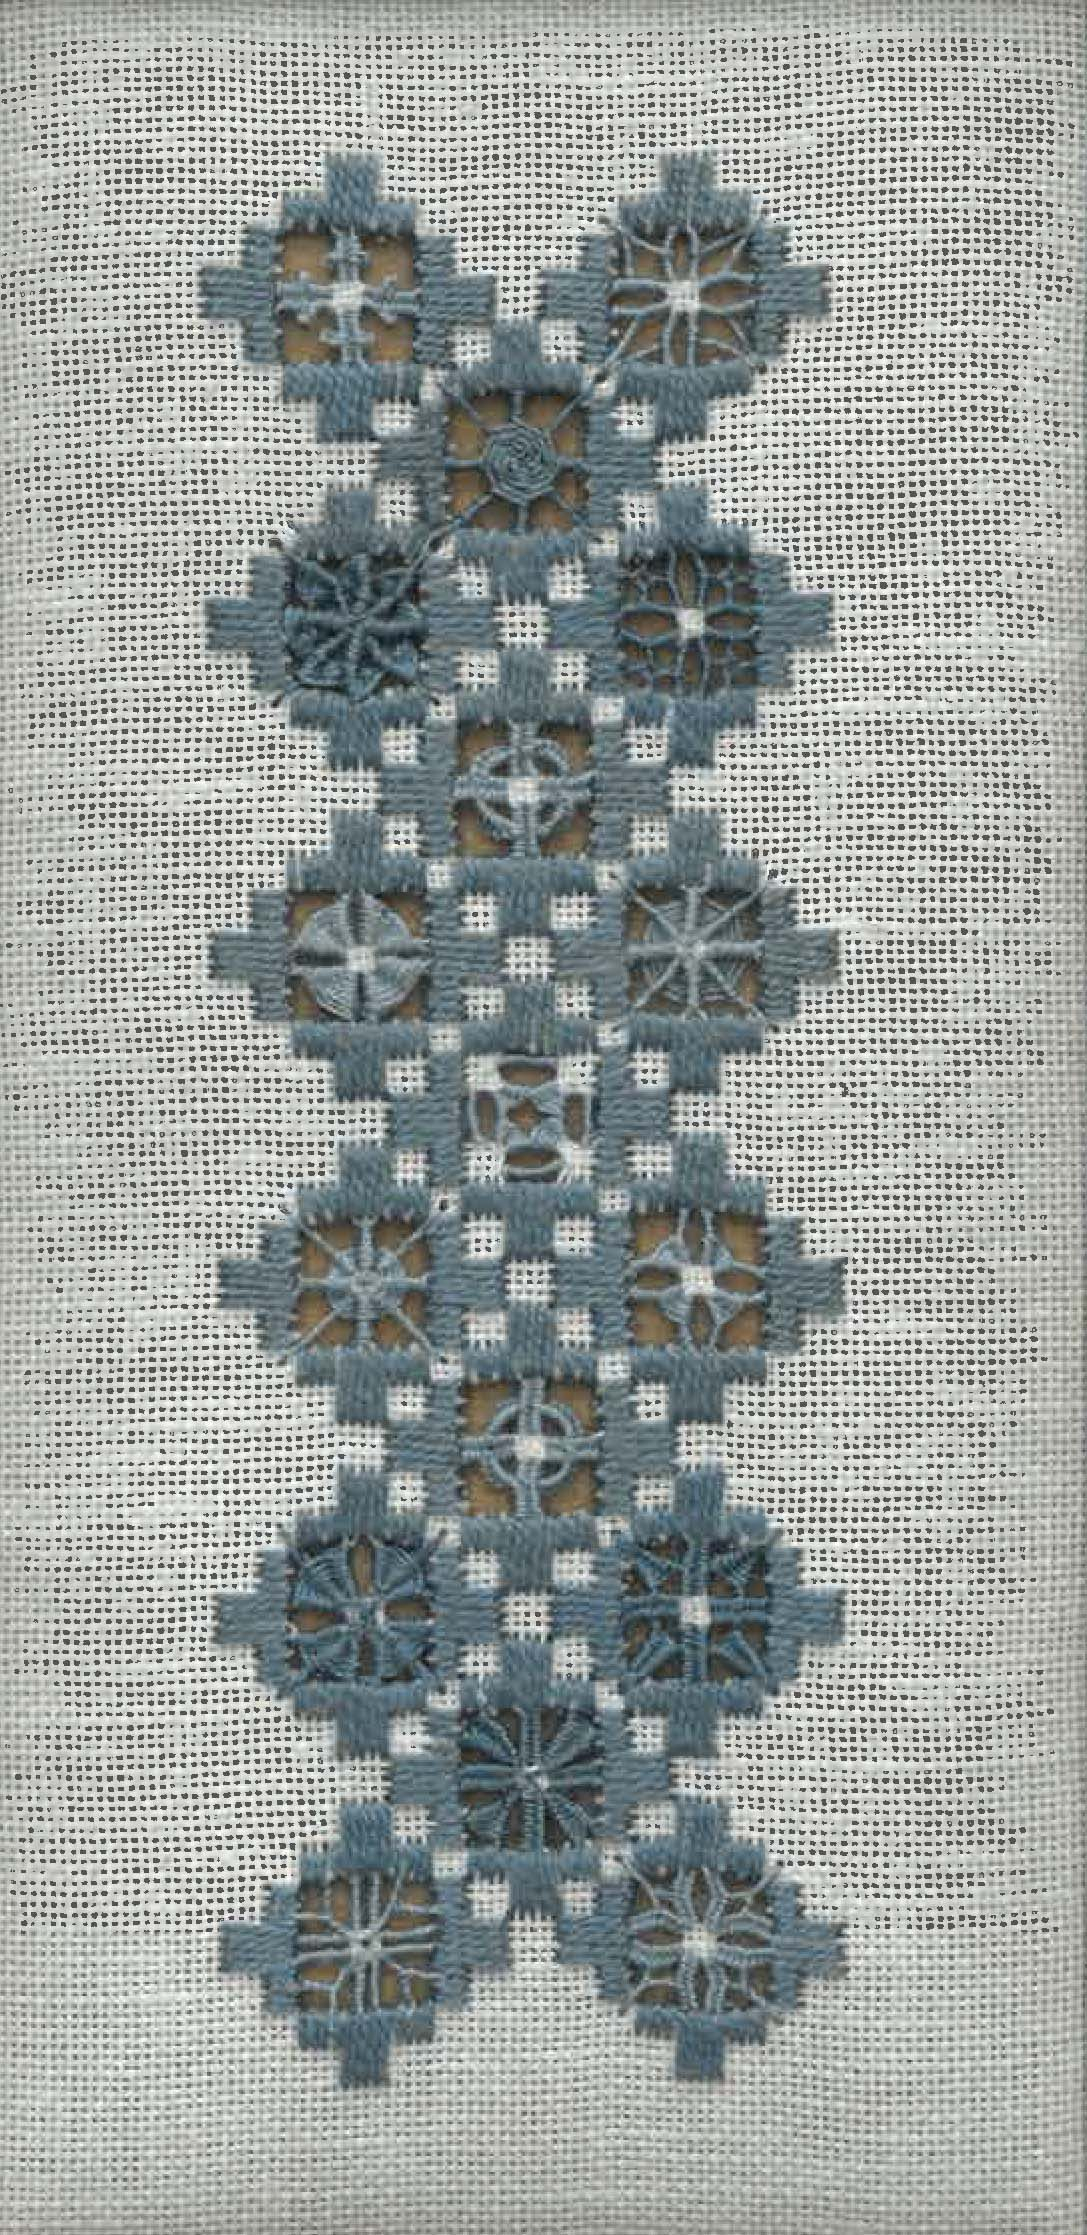 Norwegian Embroidery Patterns Hardanger Embroidery